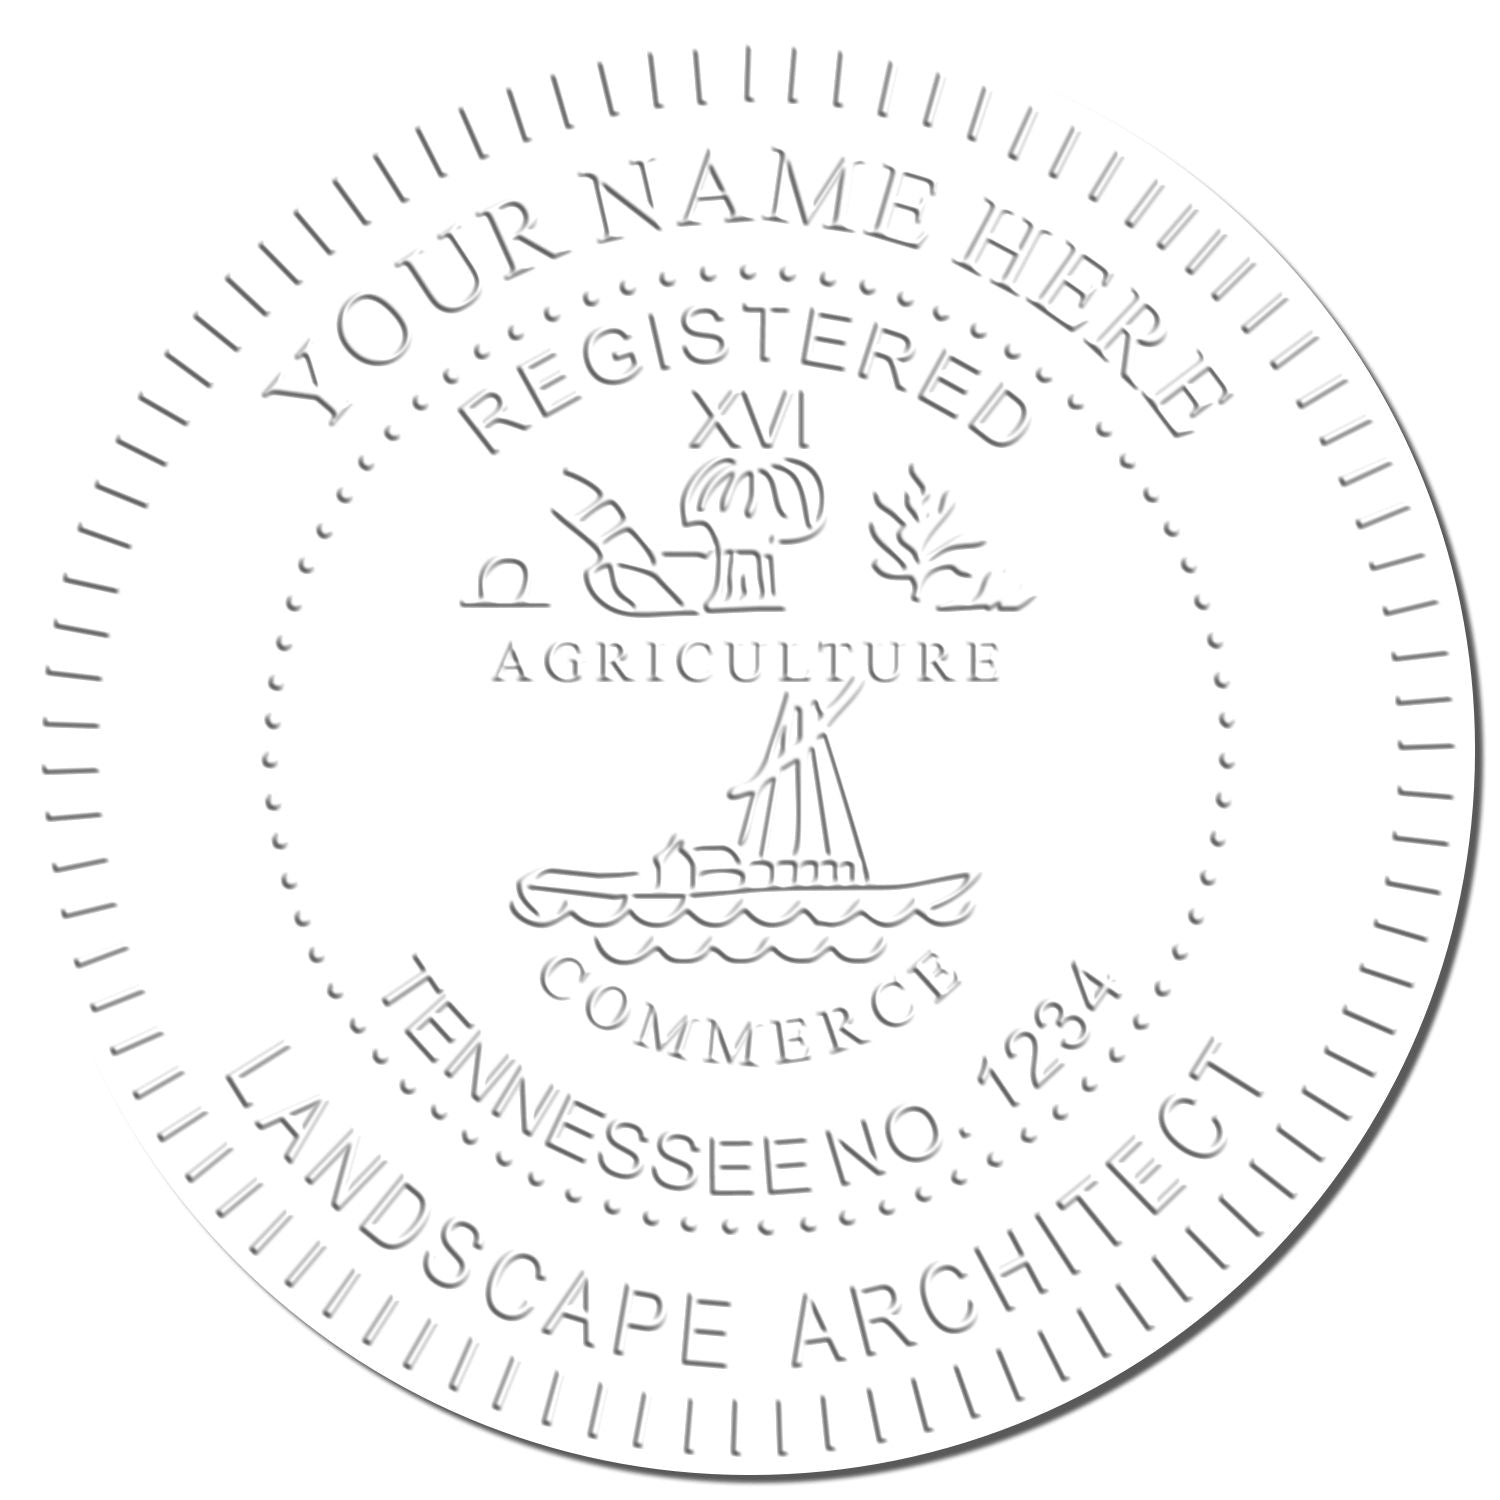 This paper is stamped with a sample imprint of the State of Tennessee Extended Long Reach Landscape Architect Seal Embosser, signifying its quality and reliability.